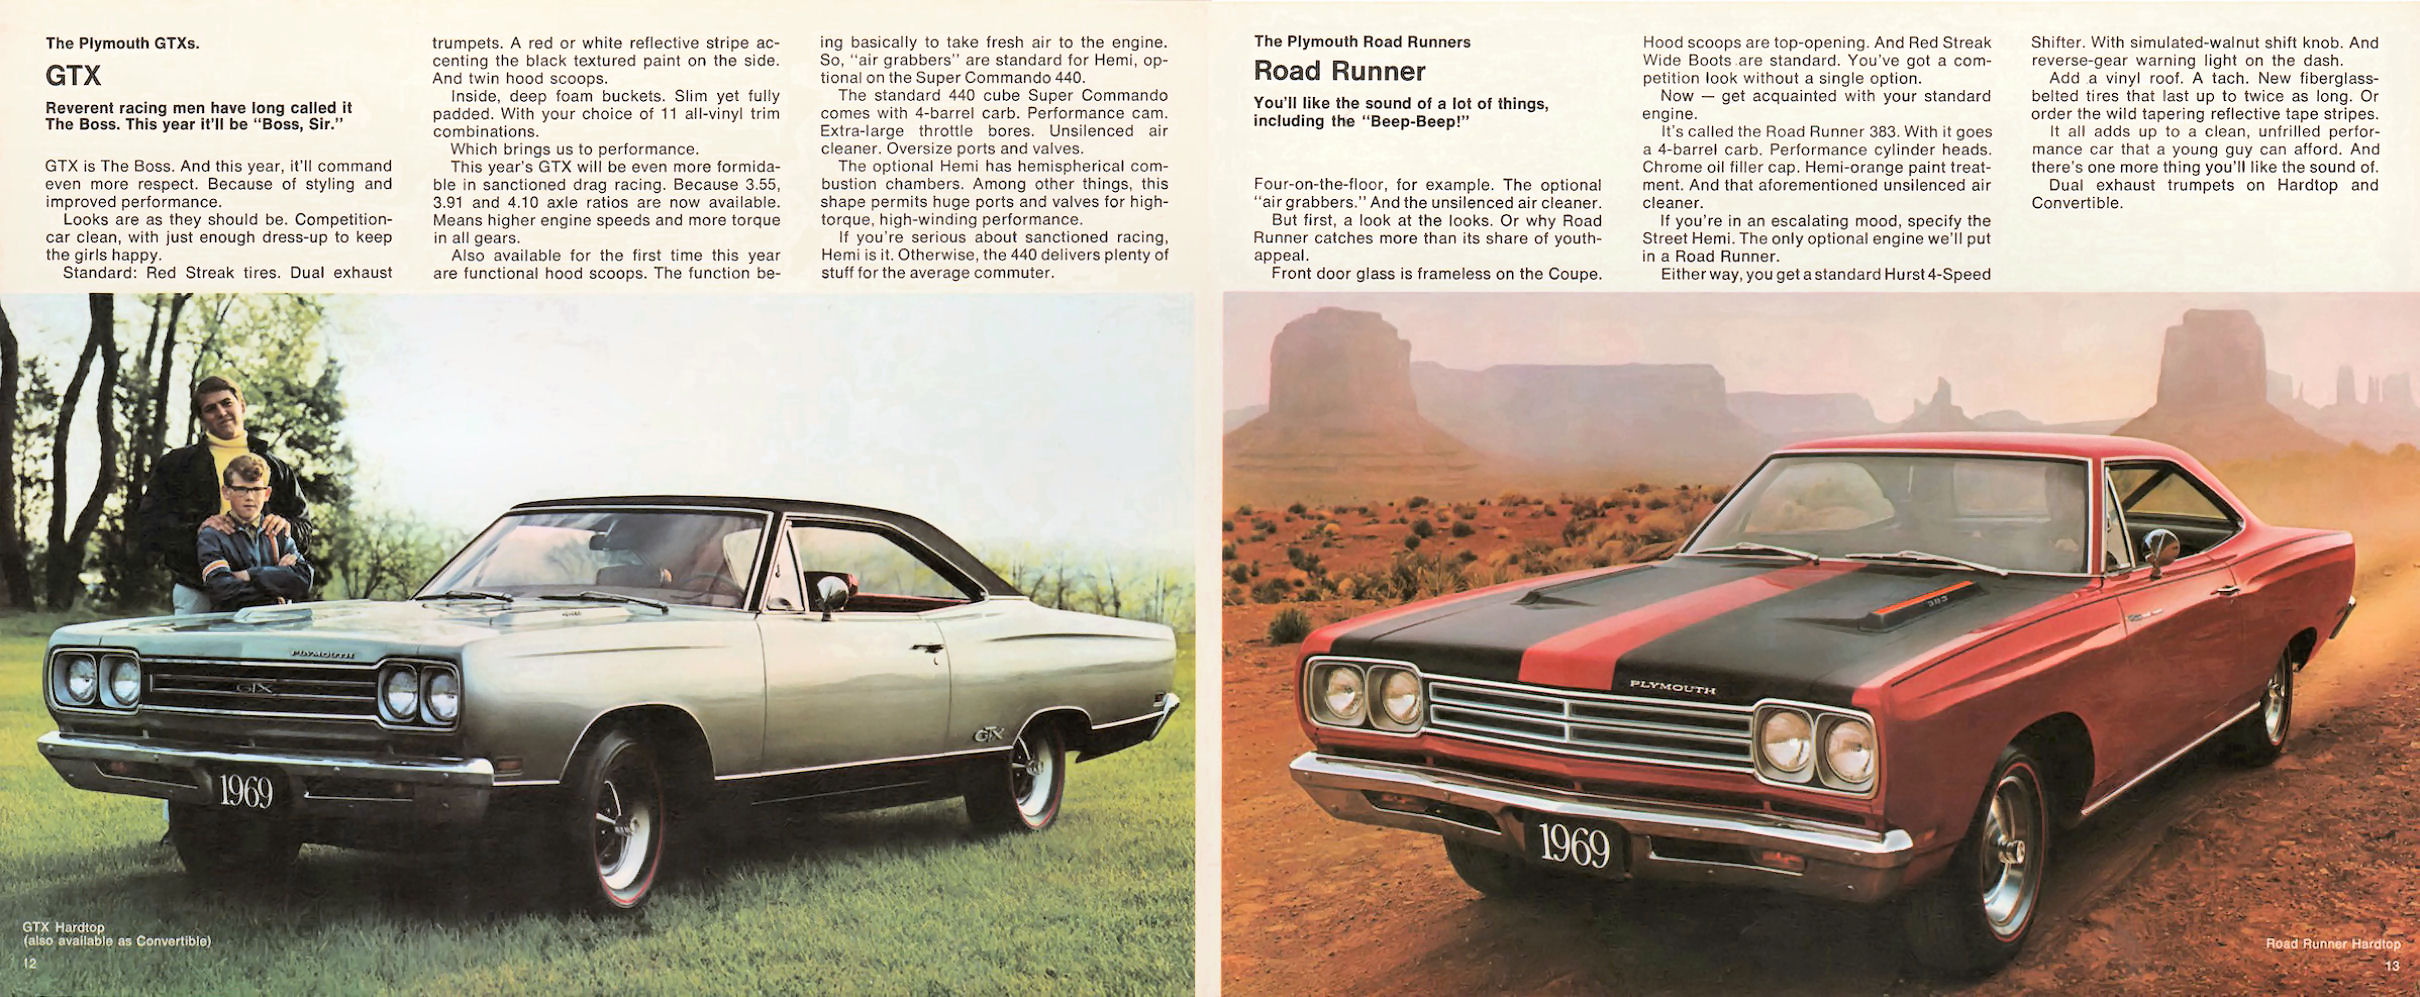 1969_Plymouth_Full_Line-12-13